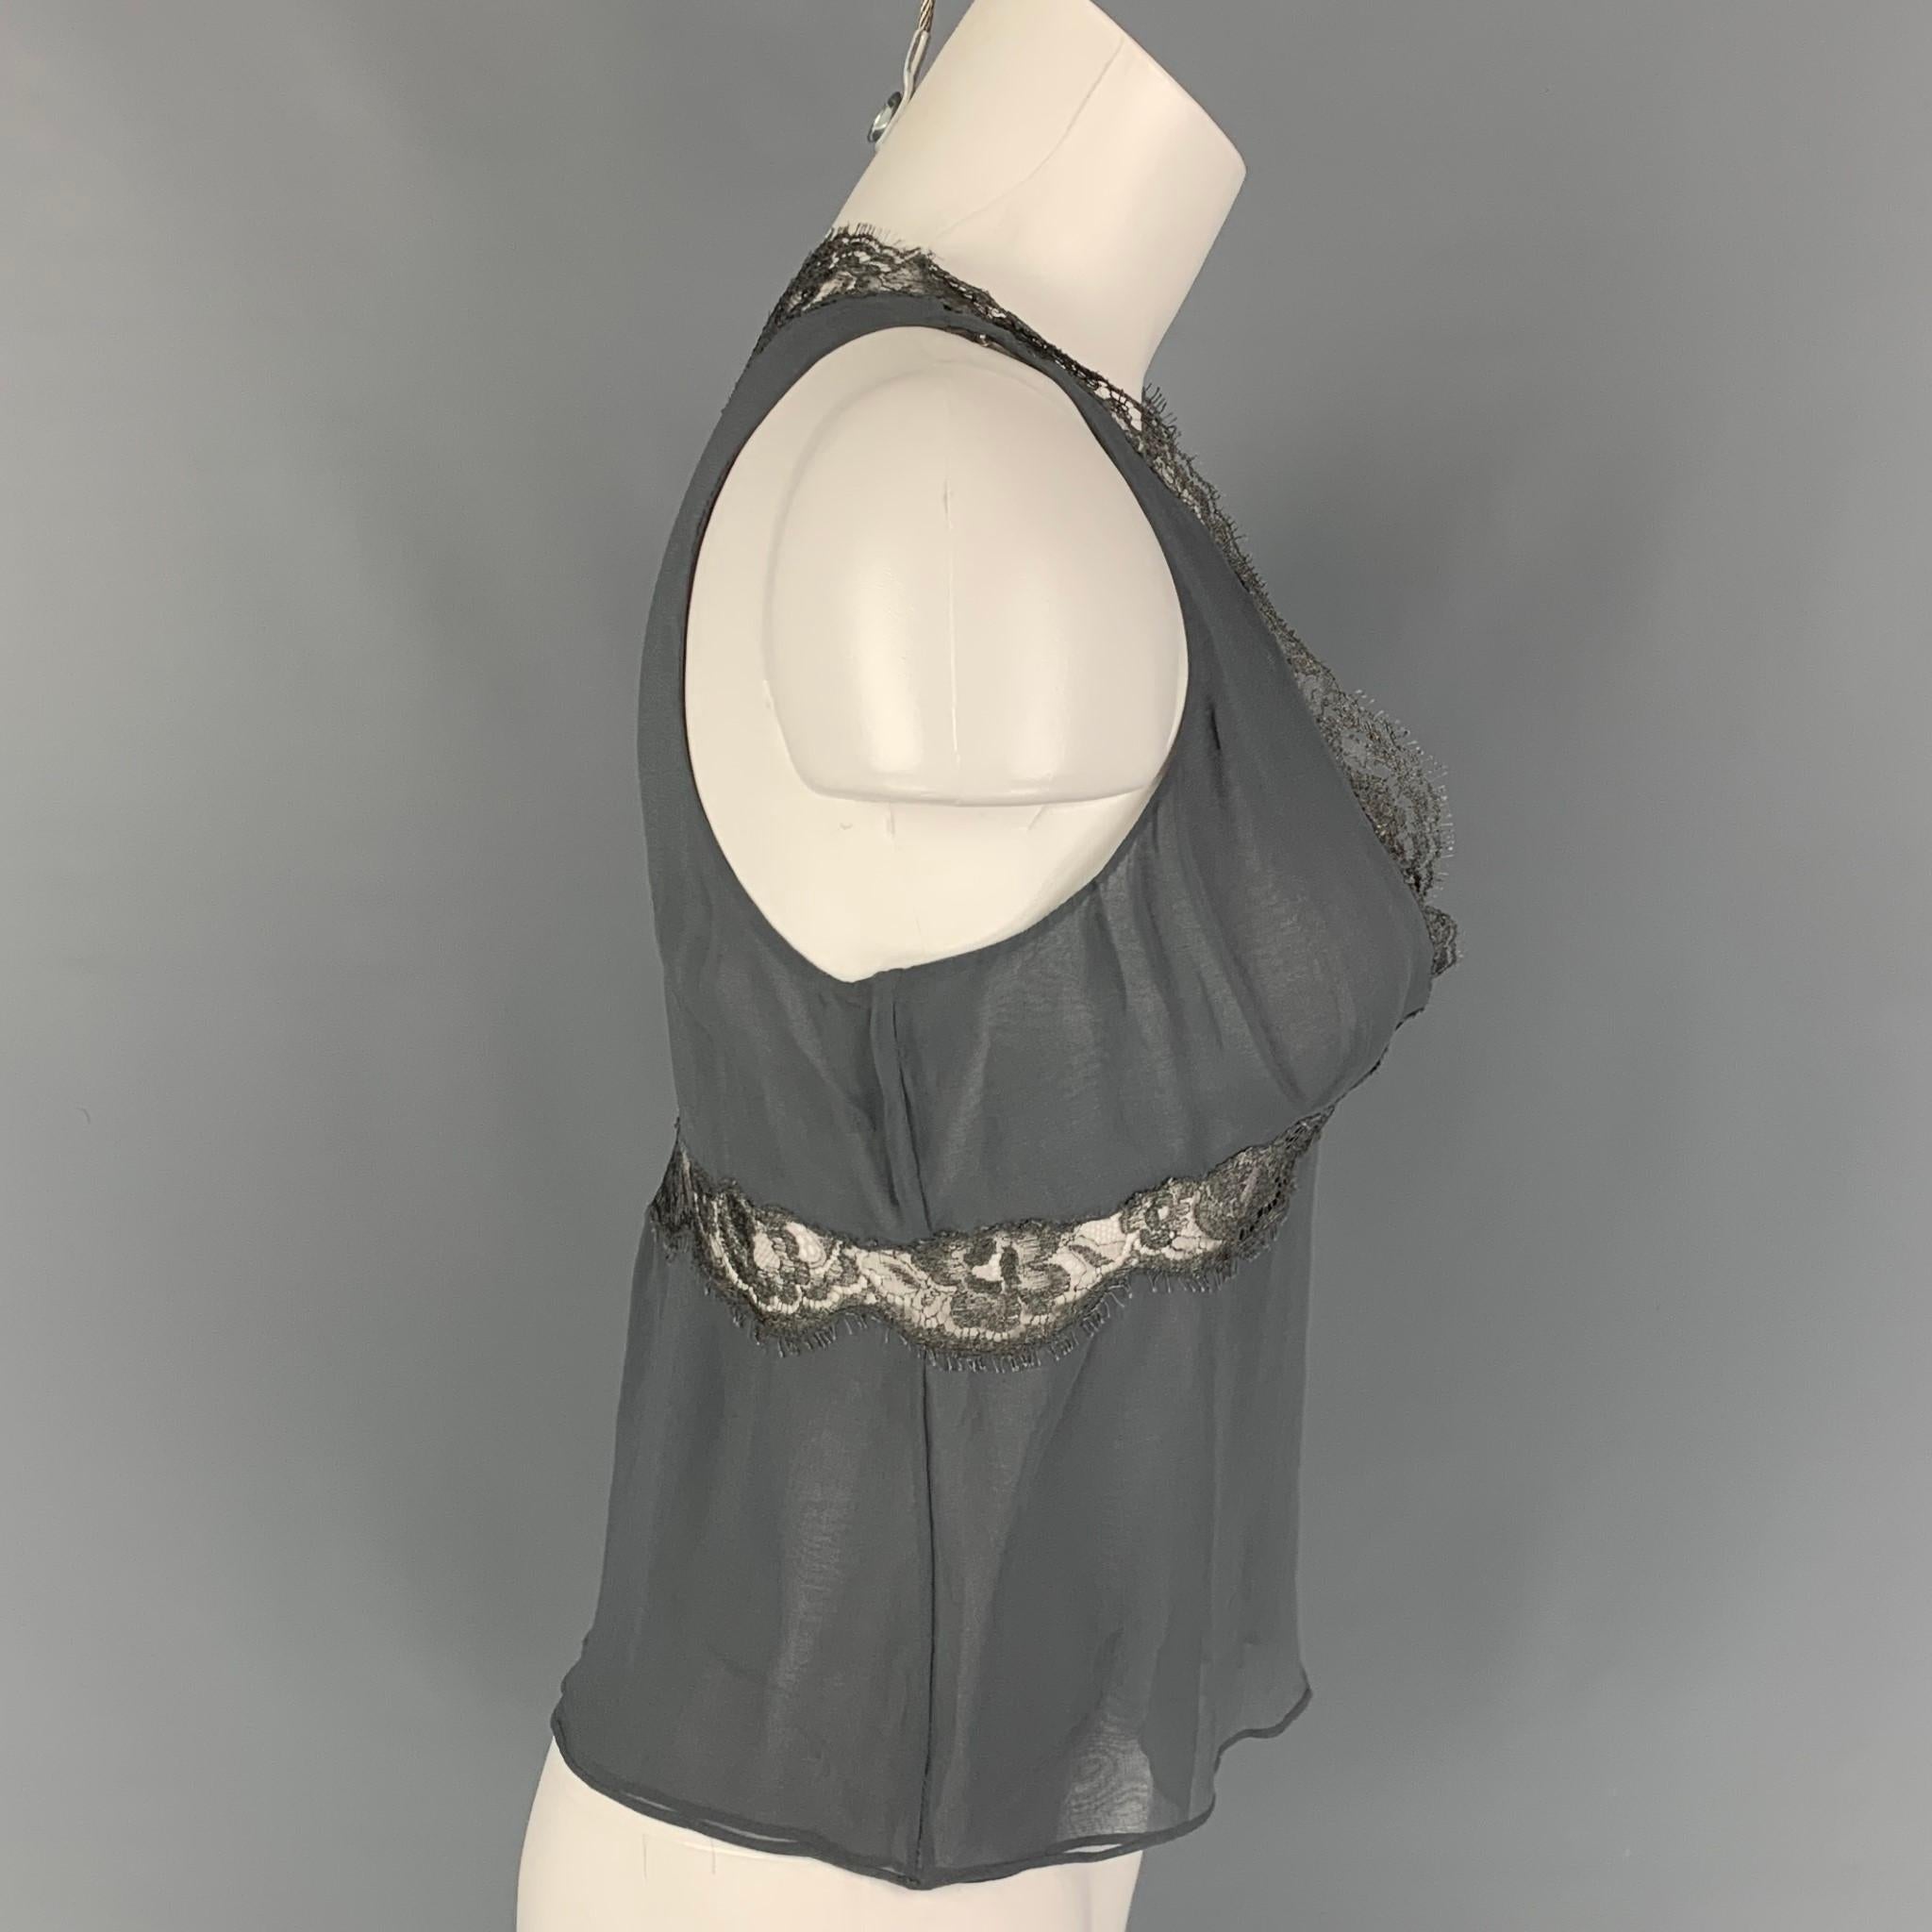 GUCCI camisole dress top comes in a grey silk featuring a lace trim, v-neck, sleeveless, and a side zipper closure. Made in Italy. 

Very Good Pre-Owned Condition.
Marked: 40

Measurements:

Shoulder: 10 in.
Bust: 30 in.
Length: 20.5 in. 